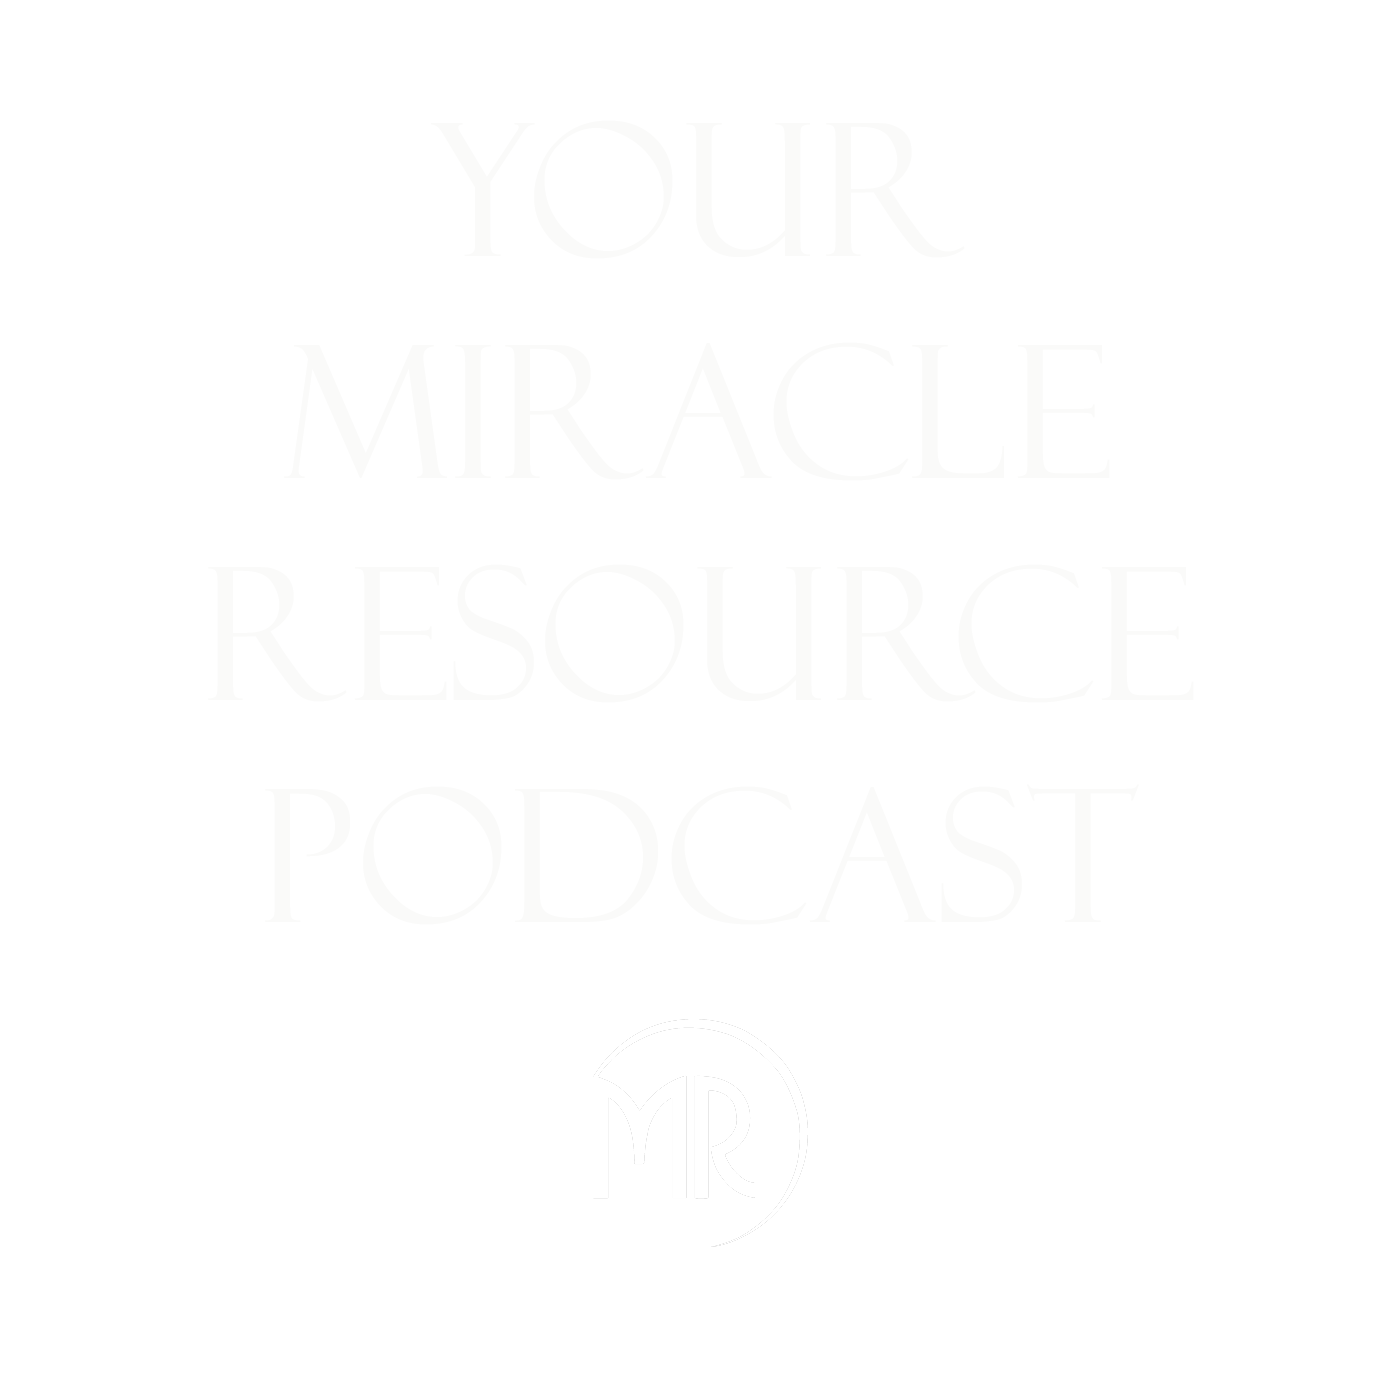 Inquisitive: Your Miracle Resource Podcast